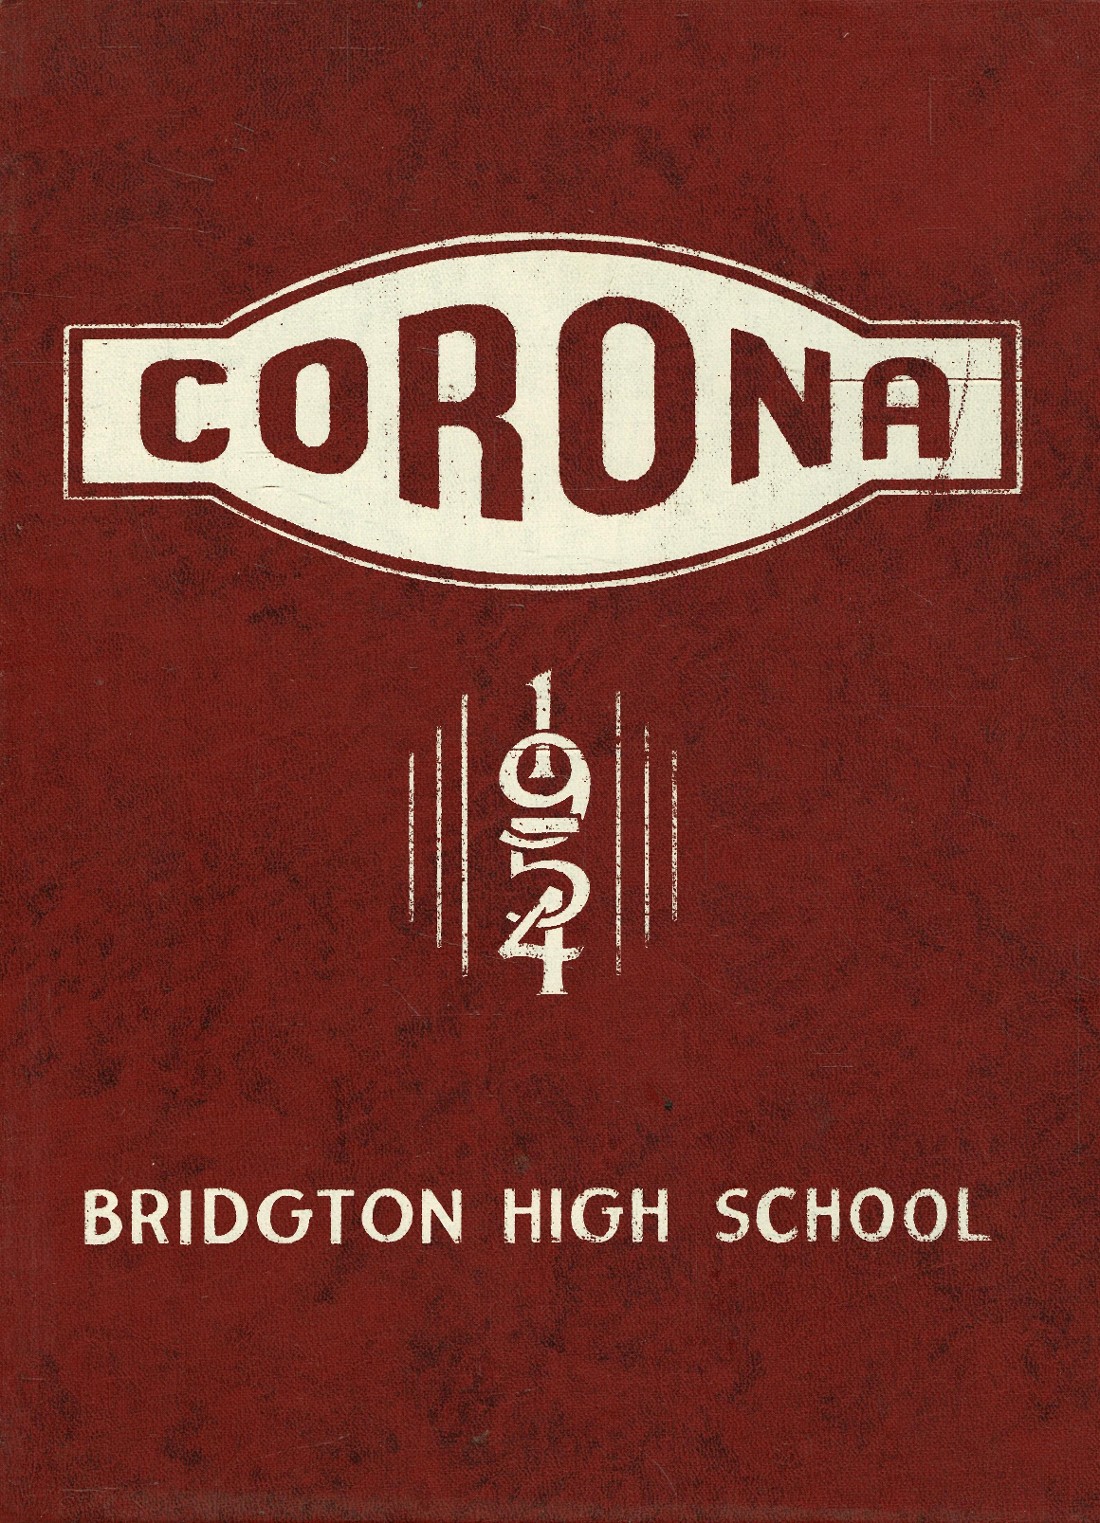 1954 yearbook from Bridgton High School from Bridgton, Maine for sale